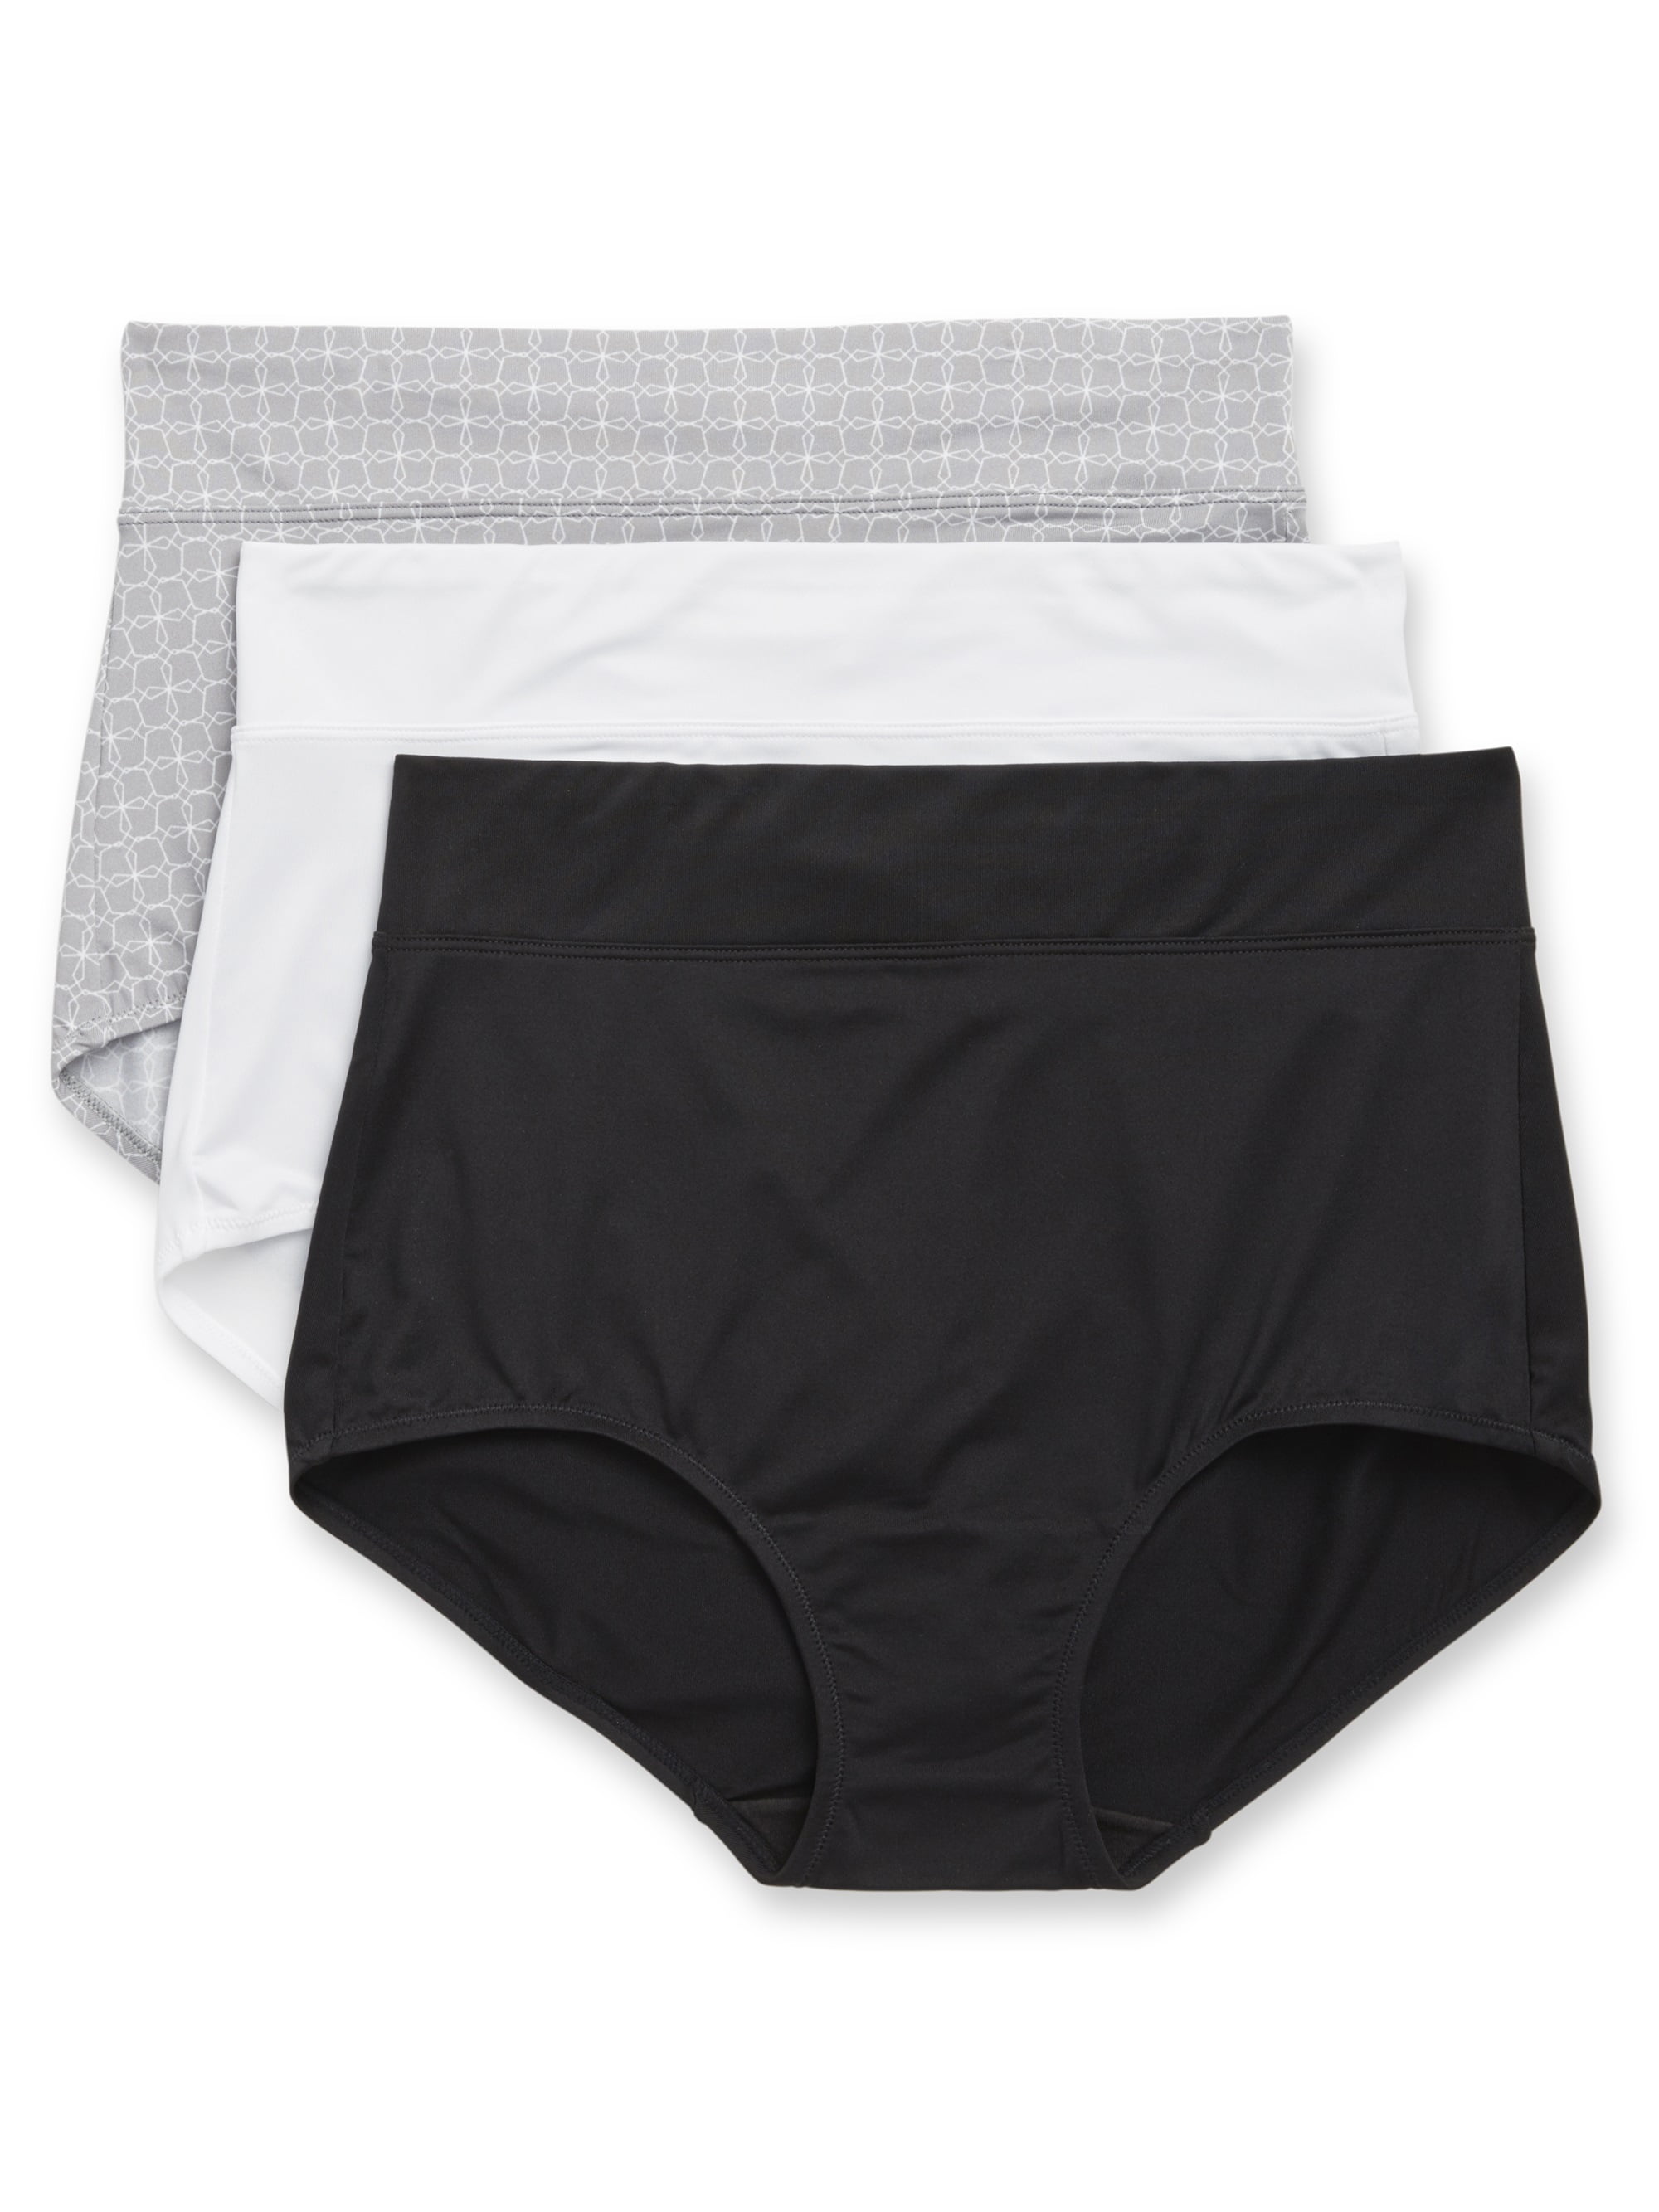 Blissful Benefits by Warner's Women's No Muffin Top Brief Panties, 3 Pack